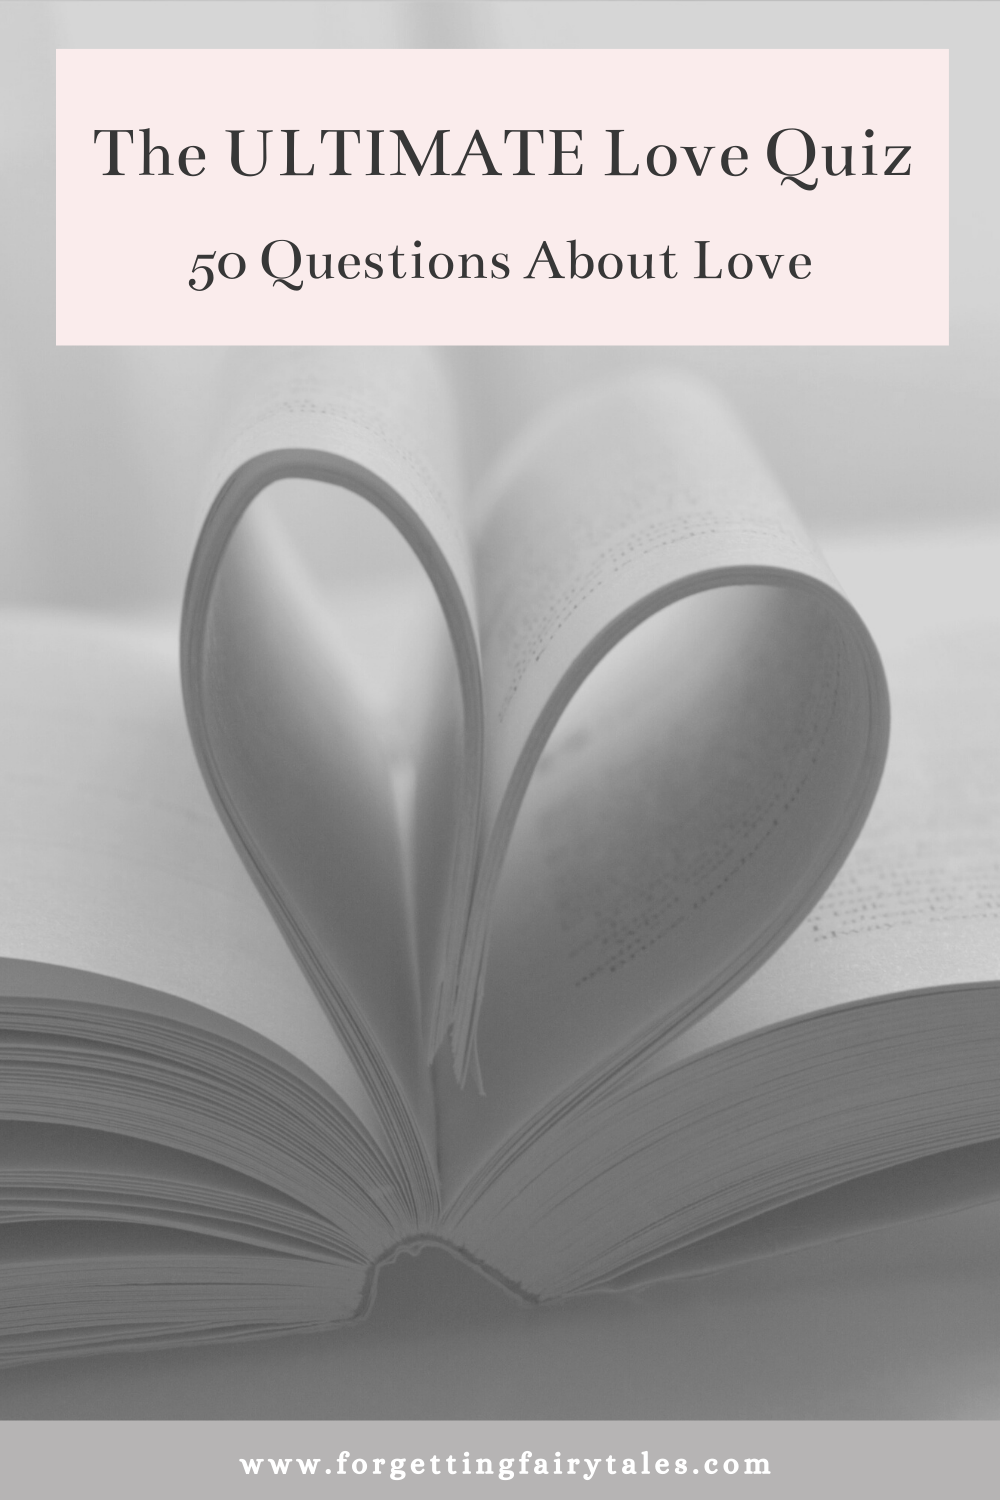 Questions About Love